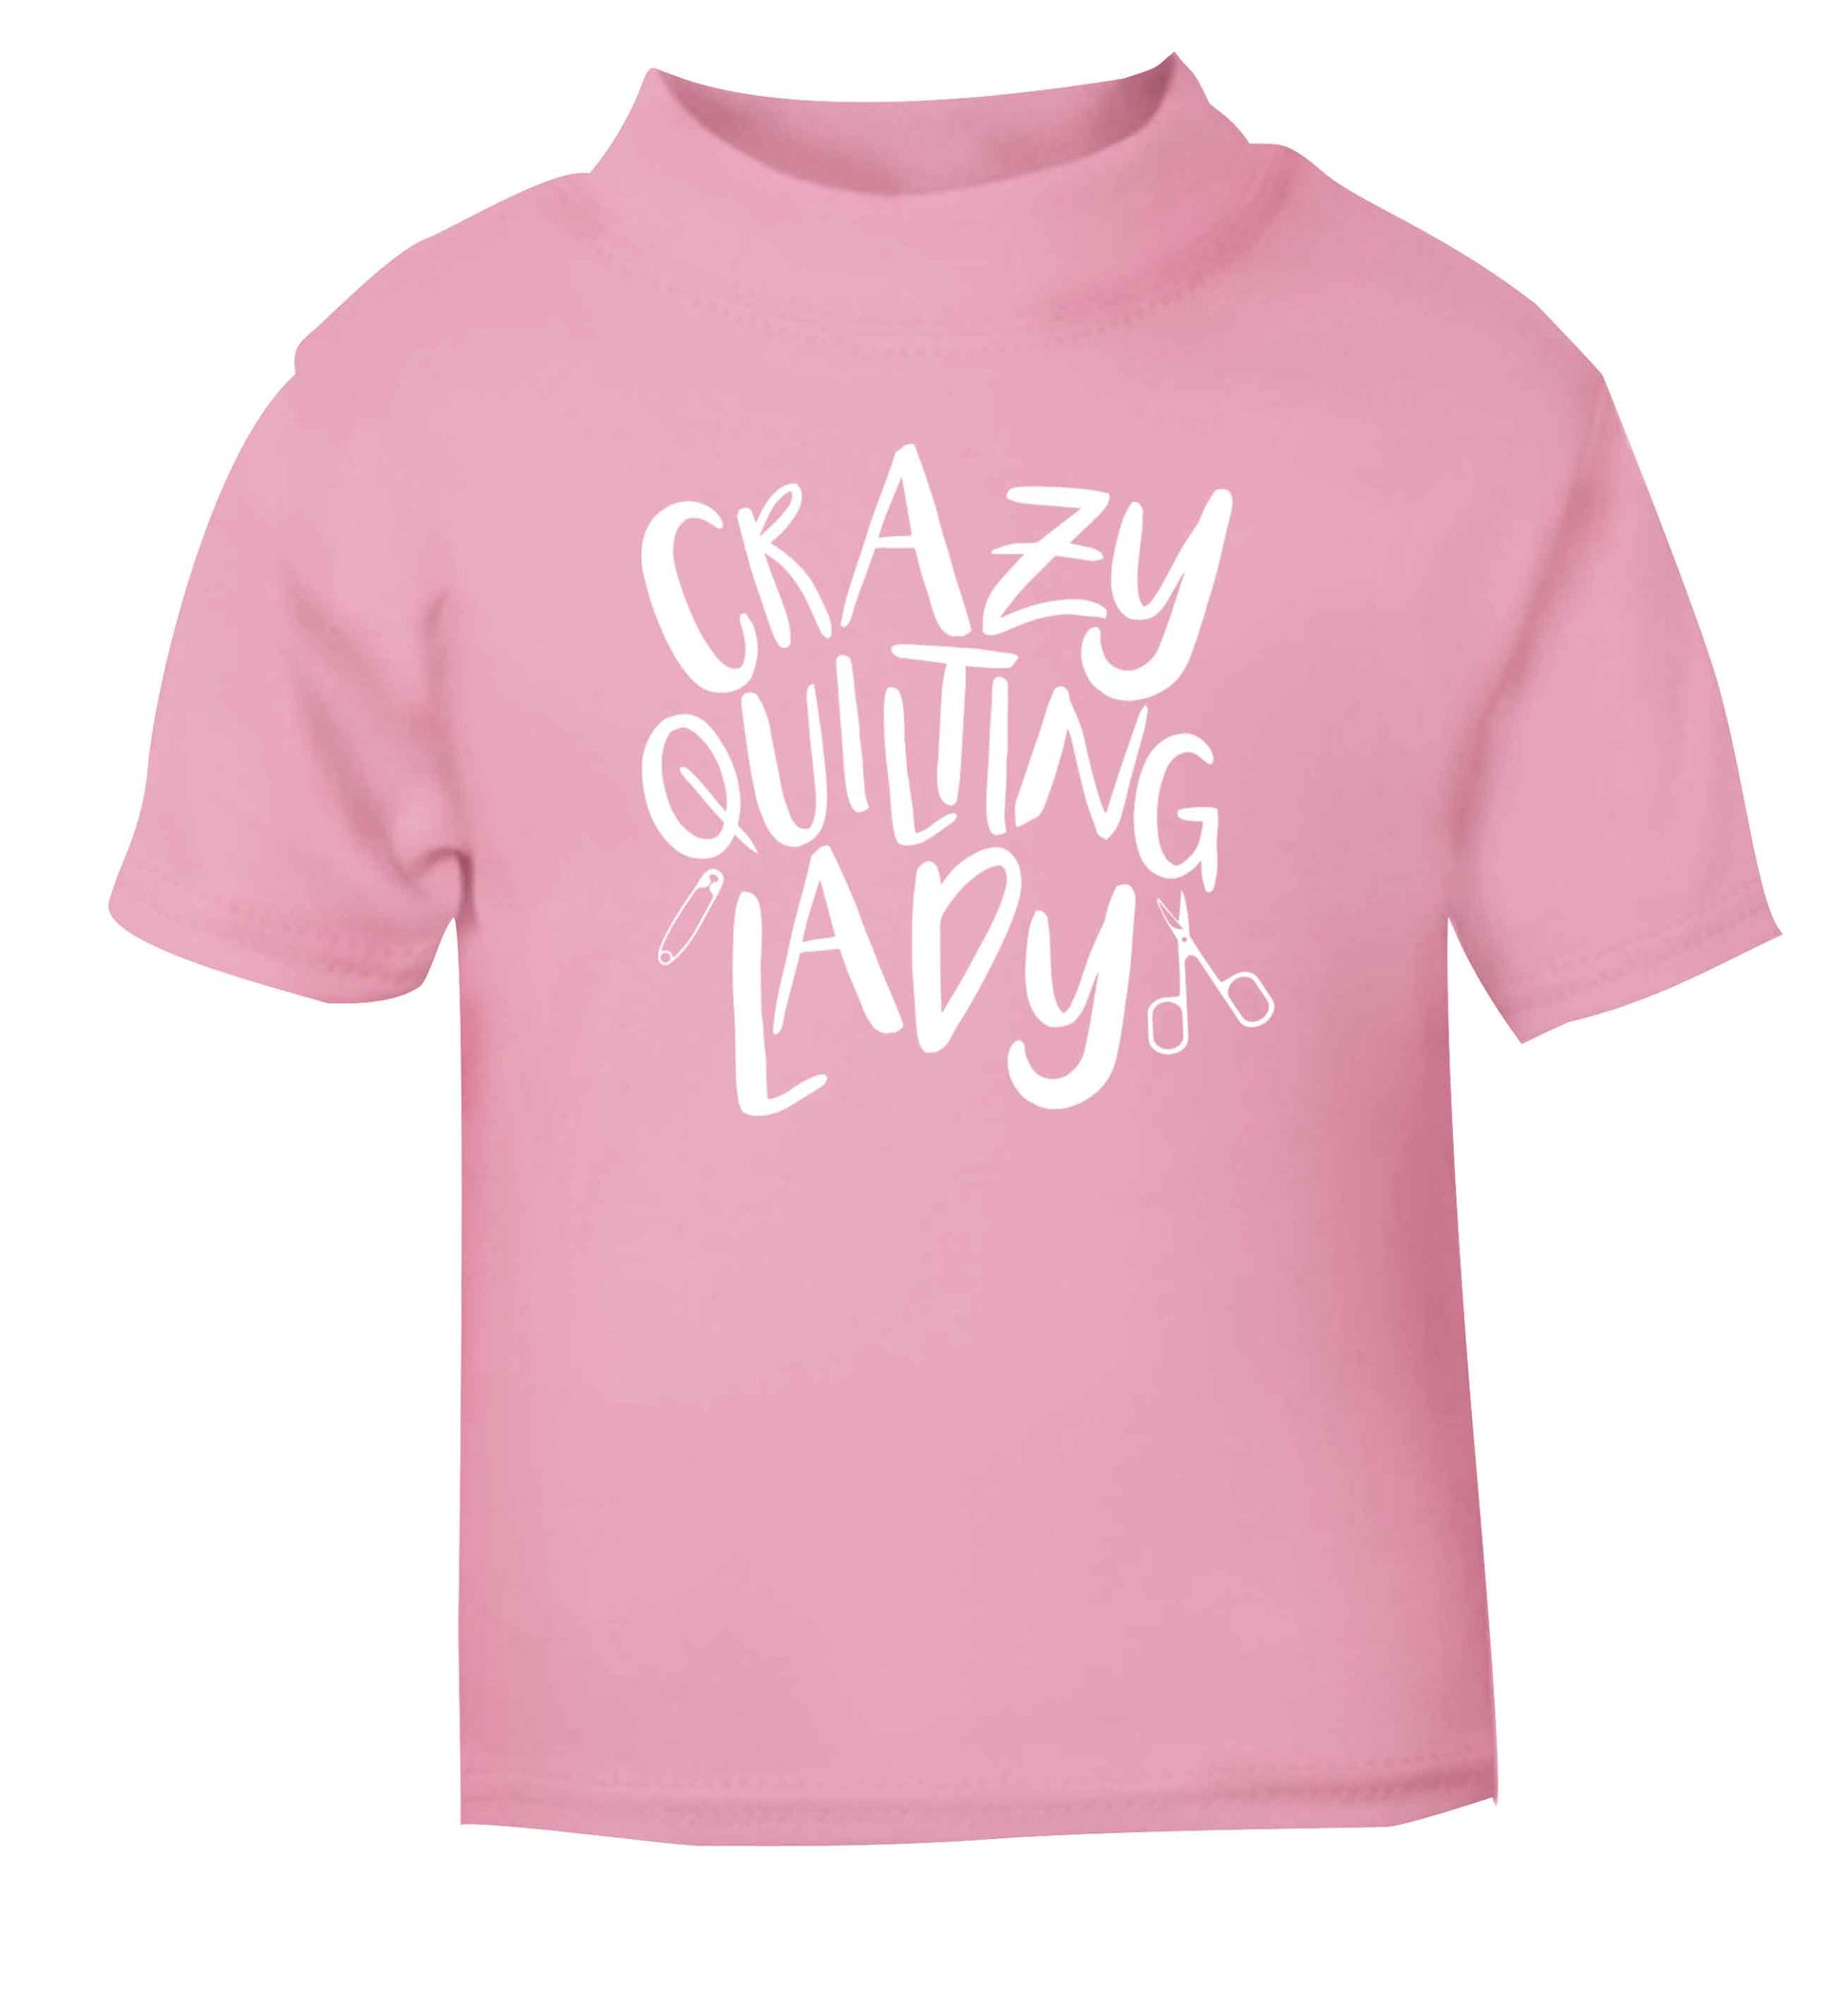 Crazy quilting lady light pink Baby Toddler Tshirt 2 Years